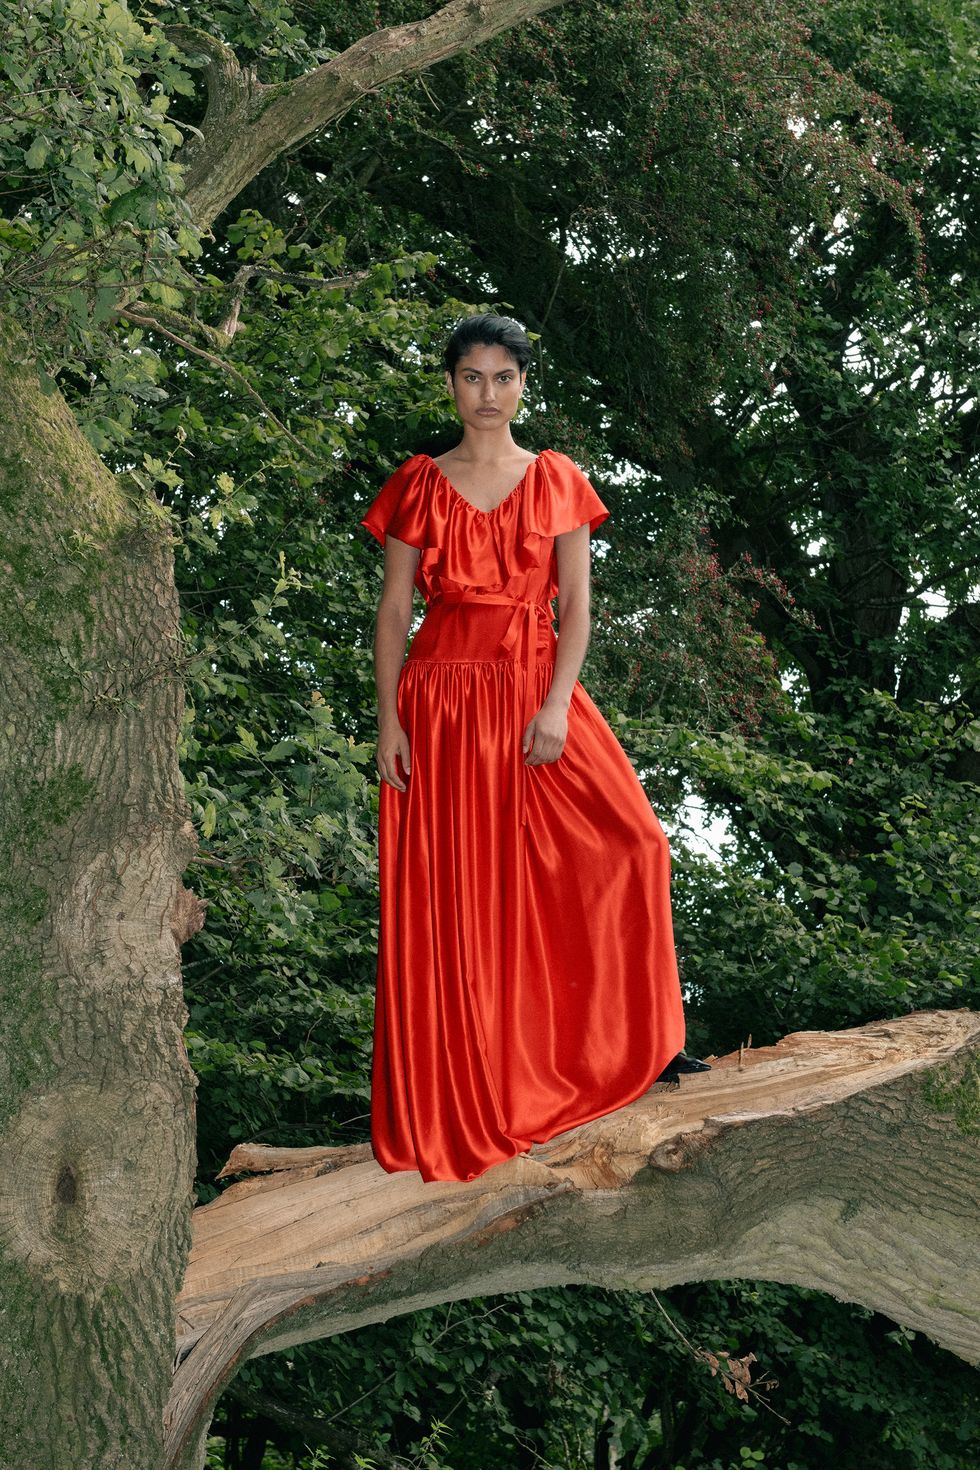 a person in a red dress standing on a tree branch